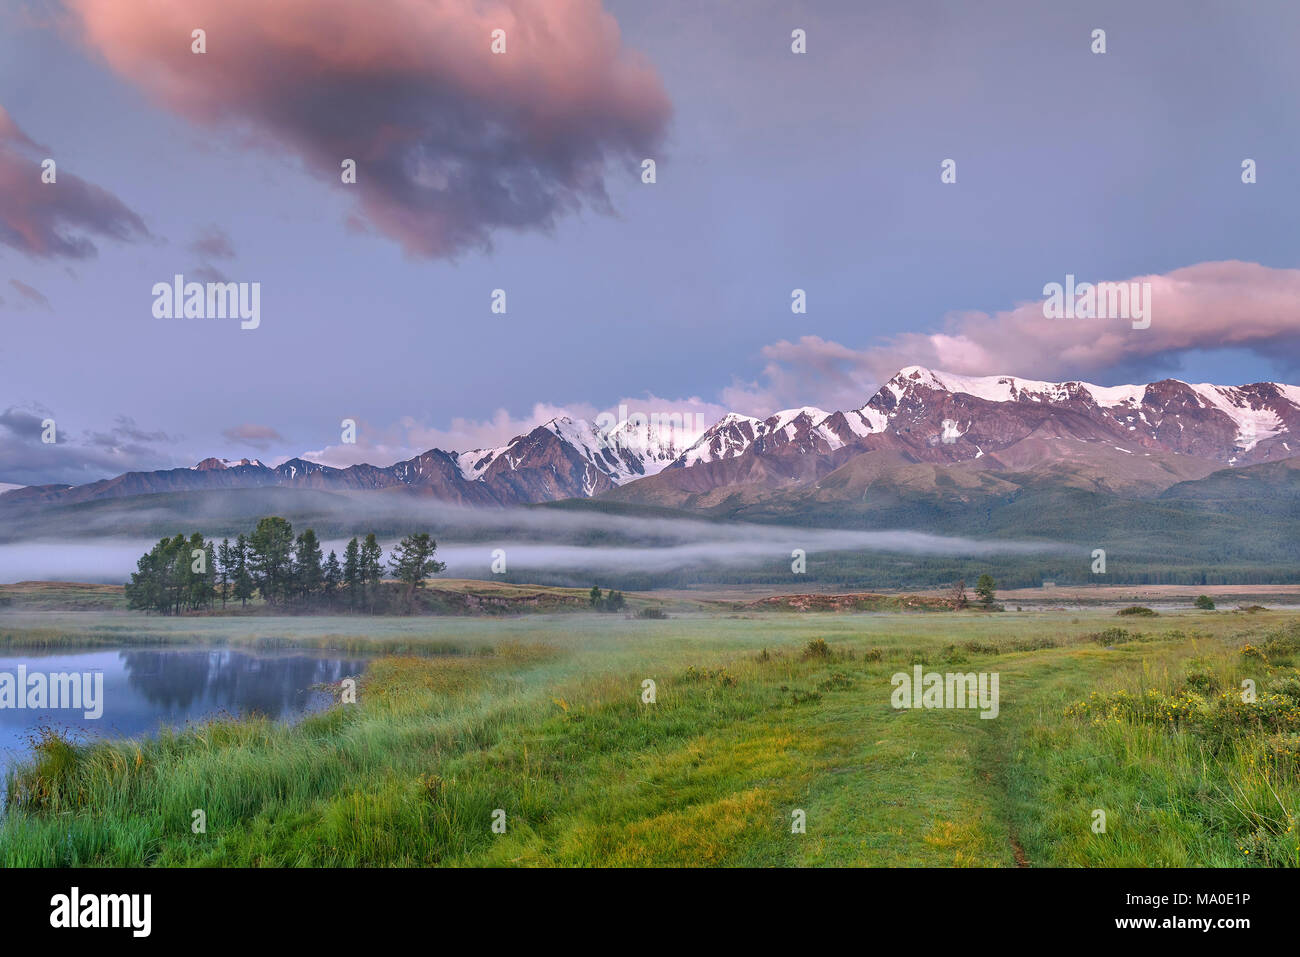 Amazing landscape with mountains, snow and forest on the slopes, mist over the lake and bushes of Kuril tea at dawn Stock Photo